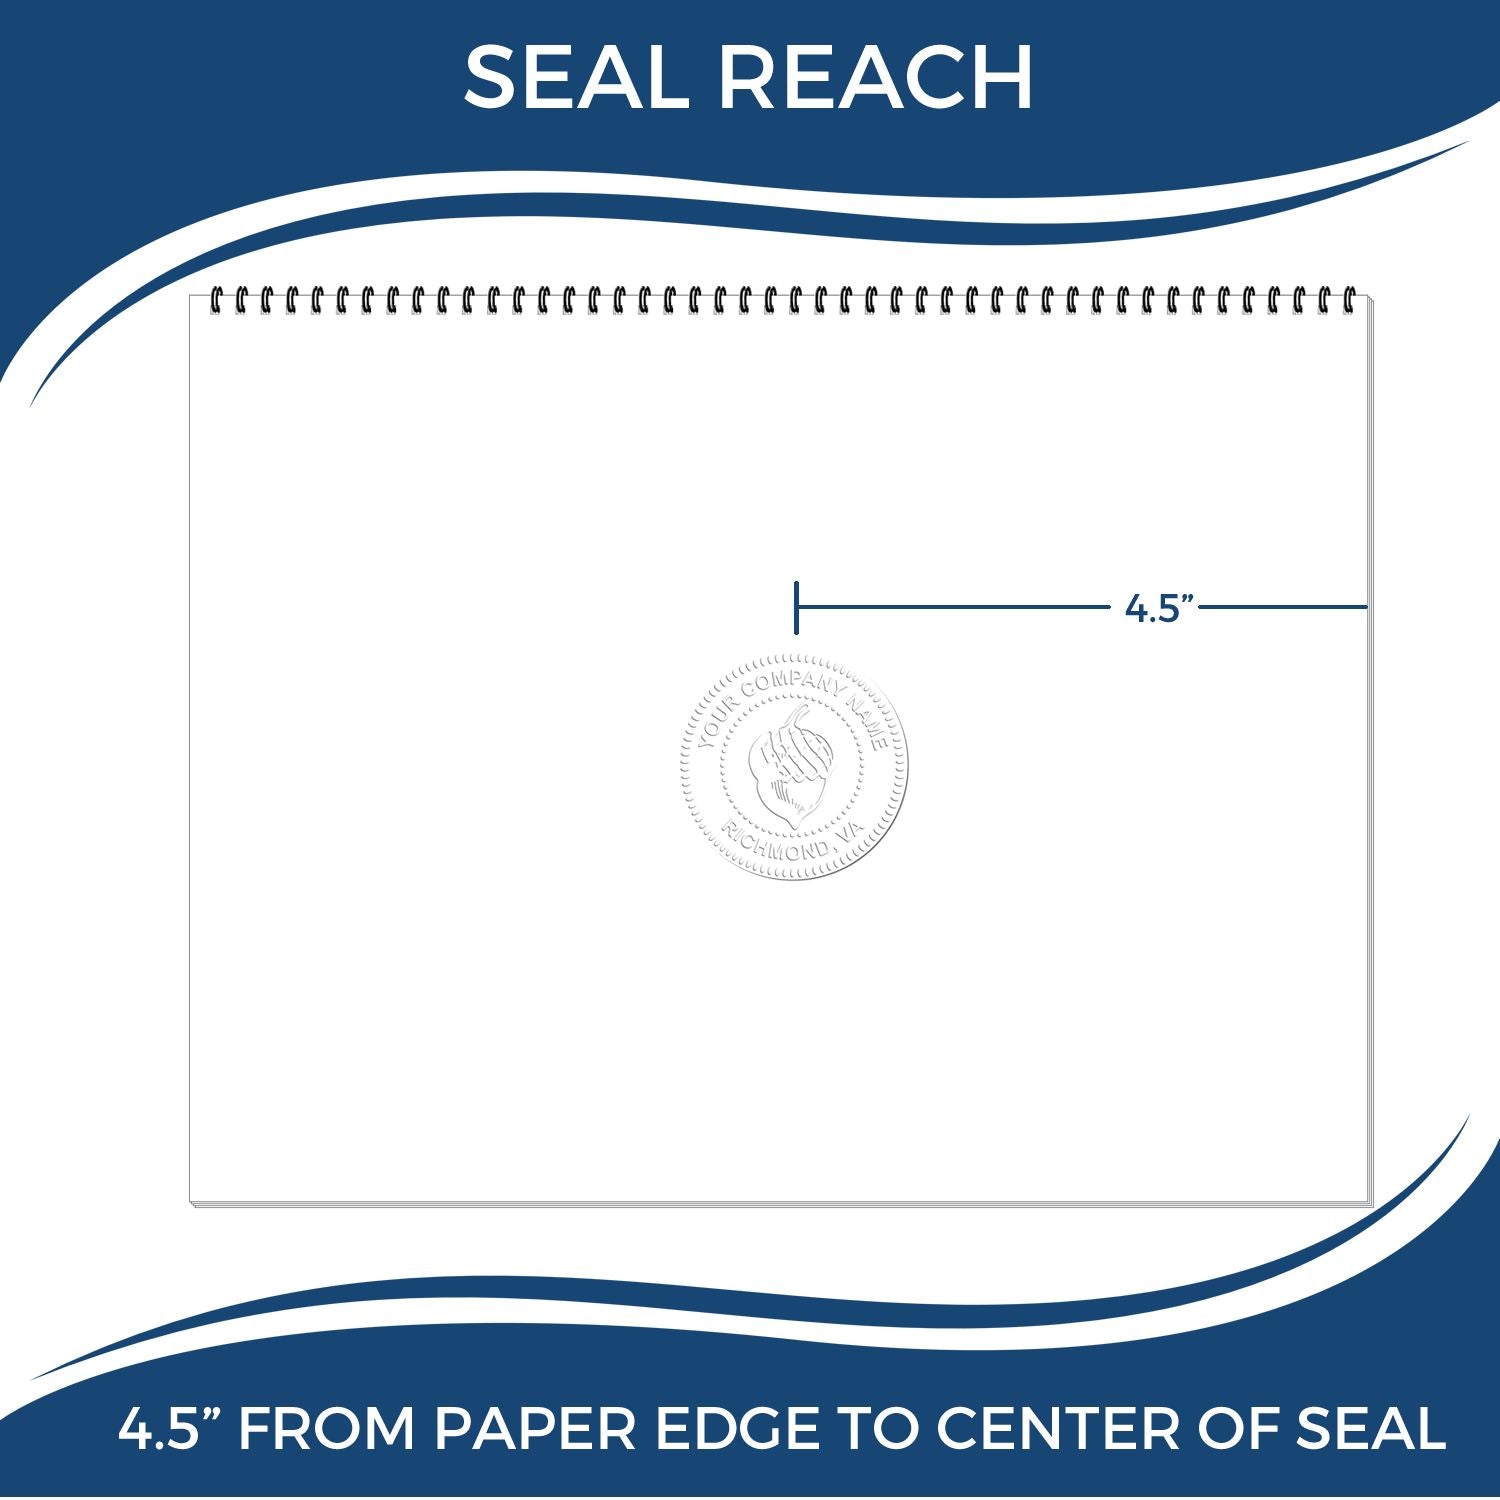 An infographic showing the seal reach which is represented by a ruler and a miniature seal image of the State of Michigan Extended Long Reach Engineer Seal